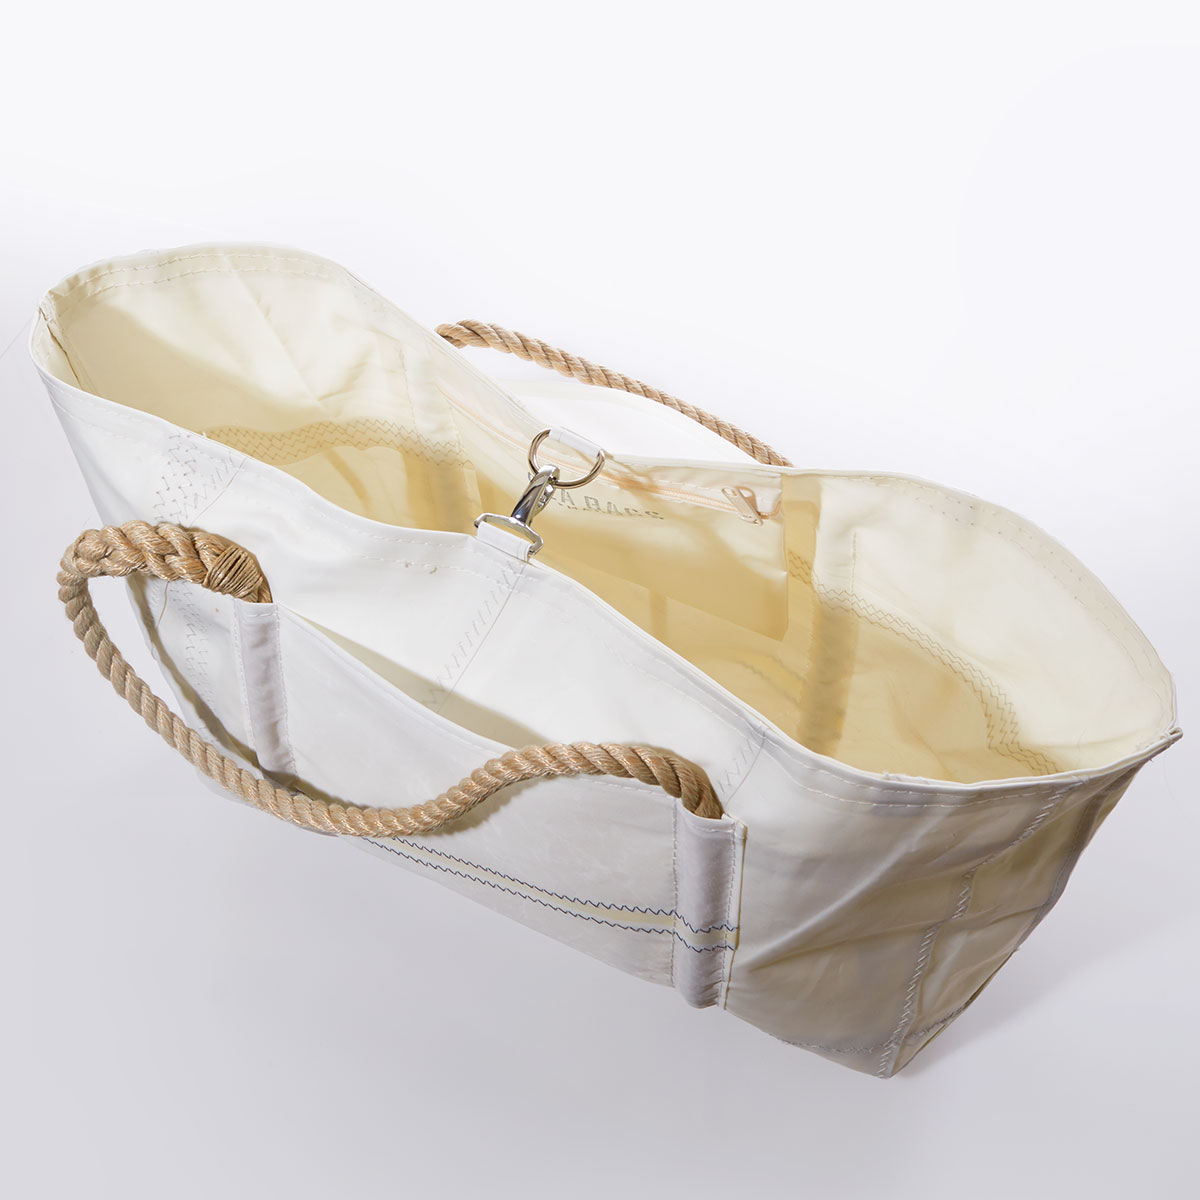 clasp closure of white recycled sail cloth tote with hemp rope handles